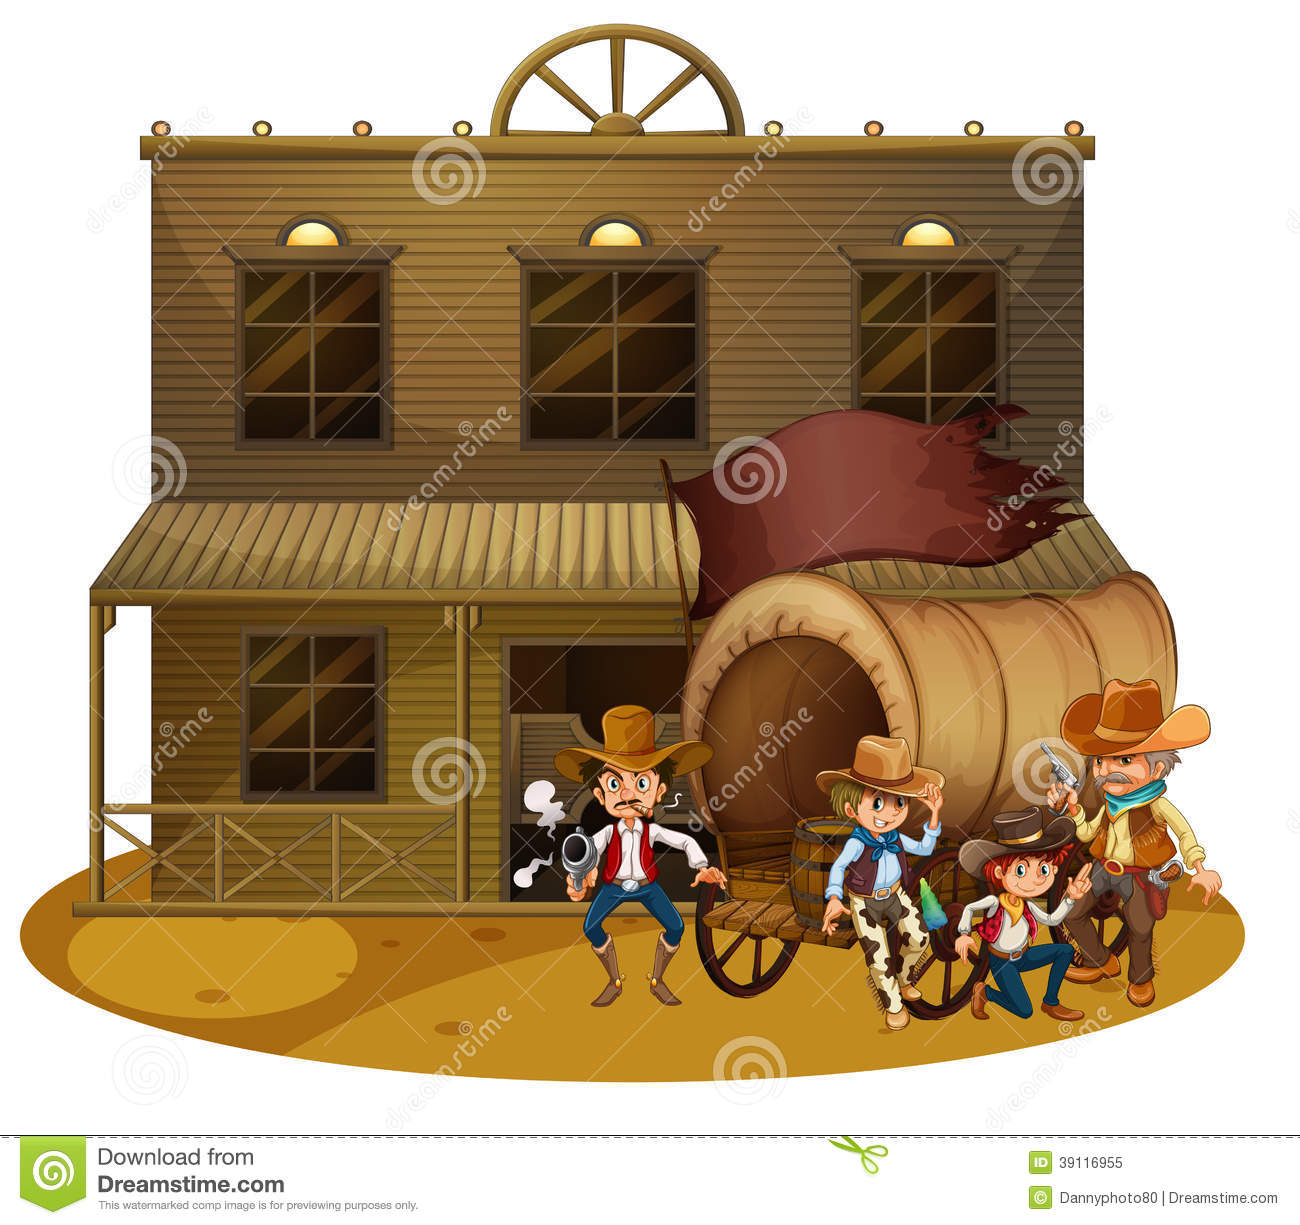 Illustration Of The Western People Outside The Wagon On A White